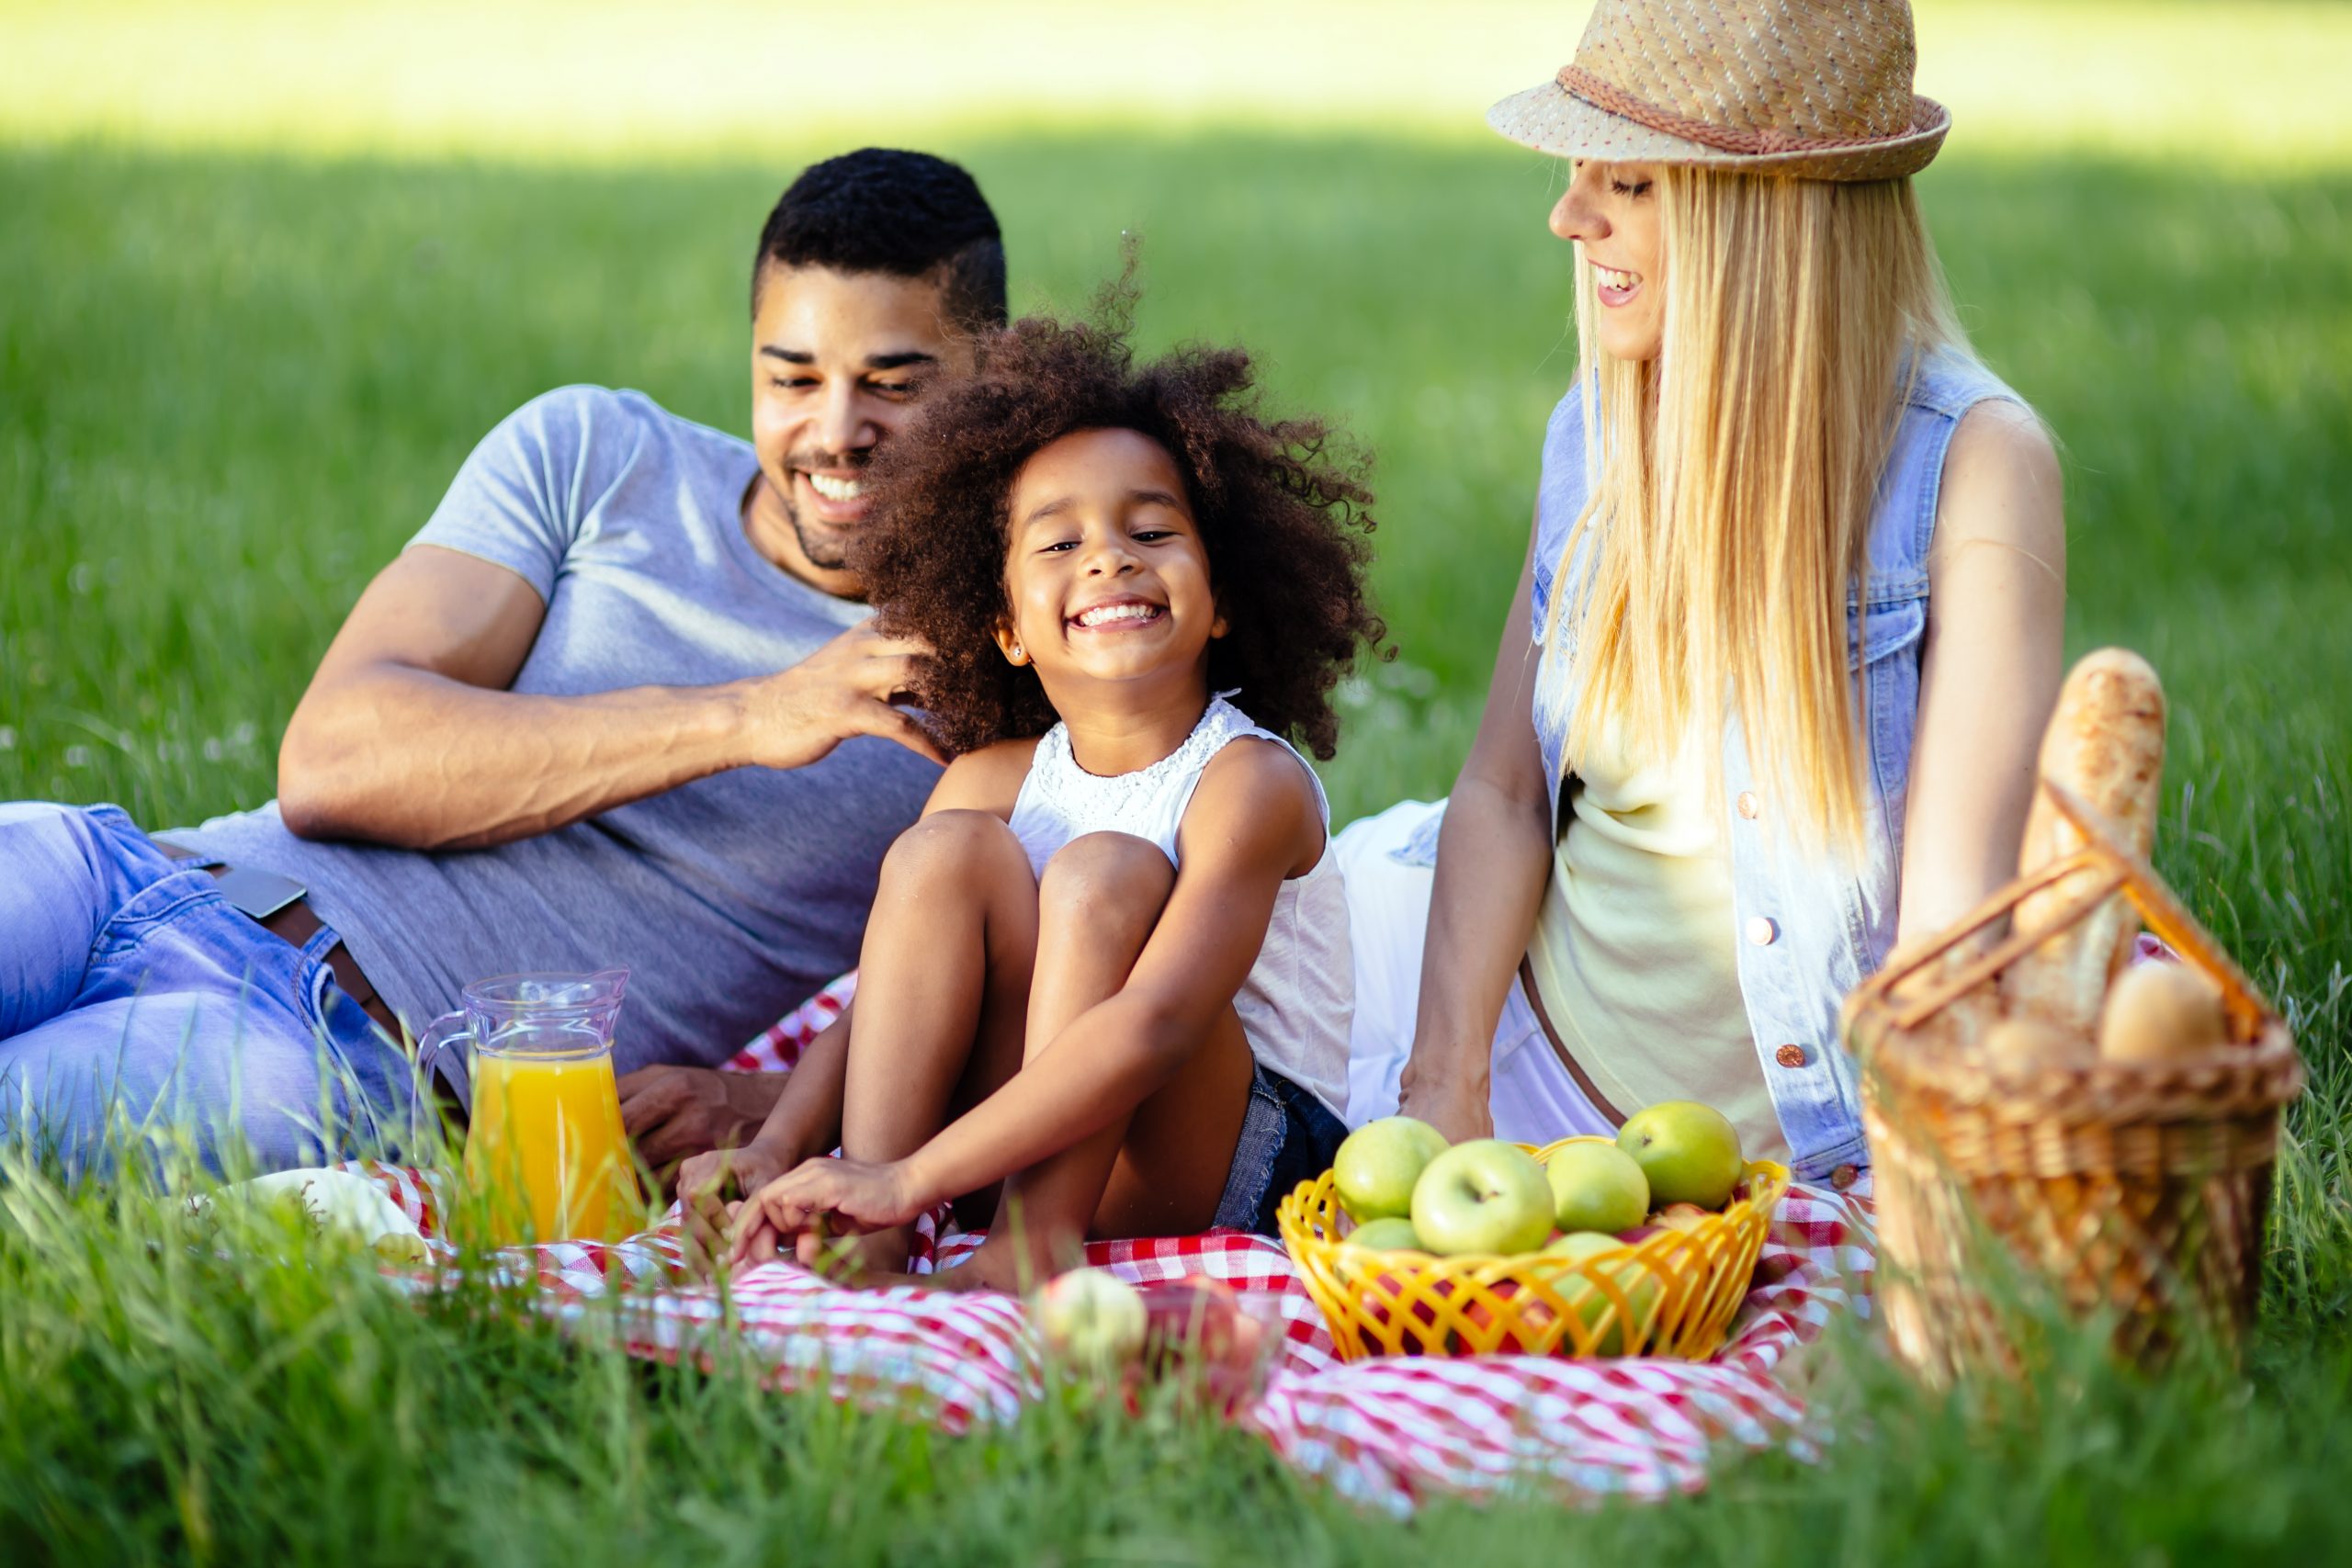 Mixed-race family, dad, mom, daughter, picnic together at a park.